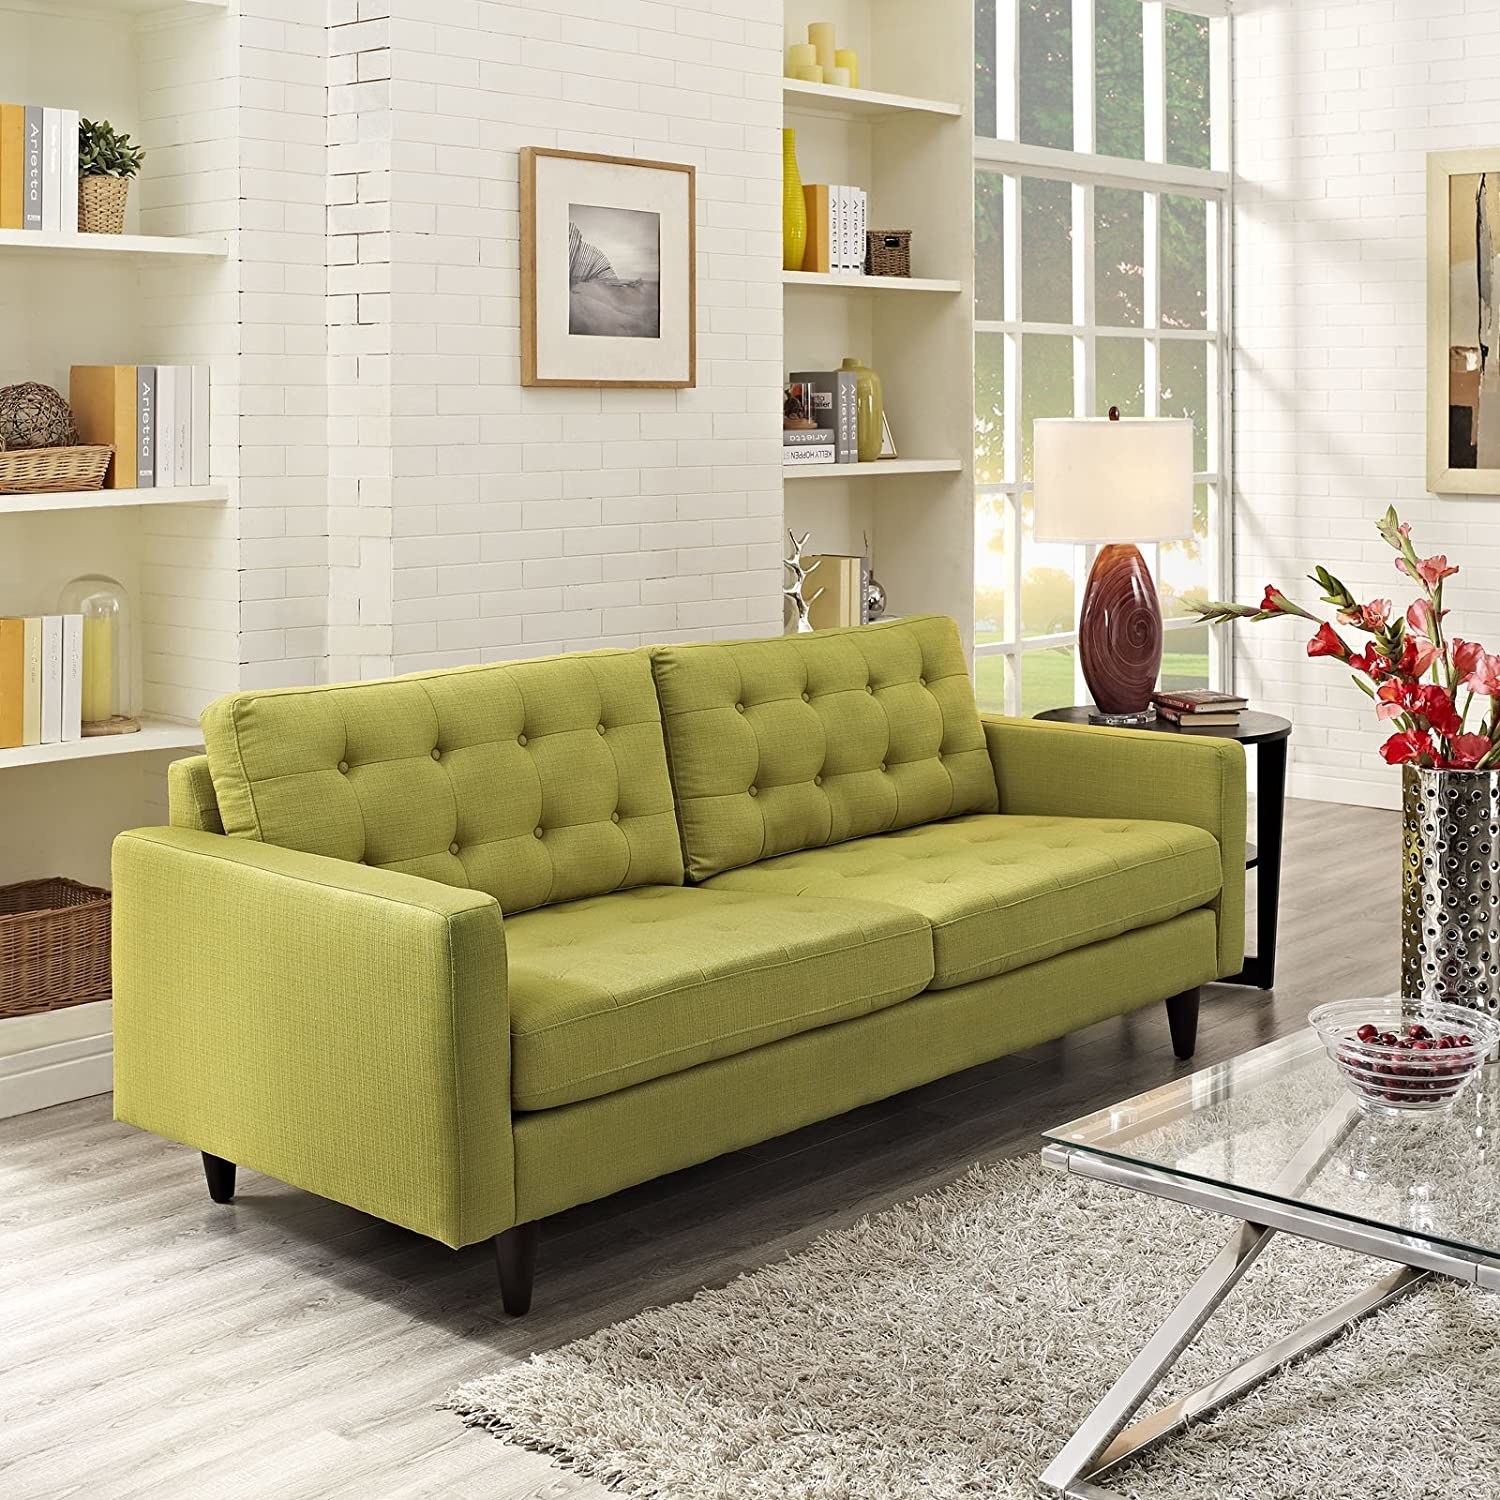 The tufted green sofa on display